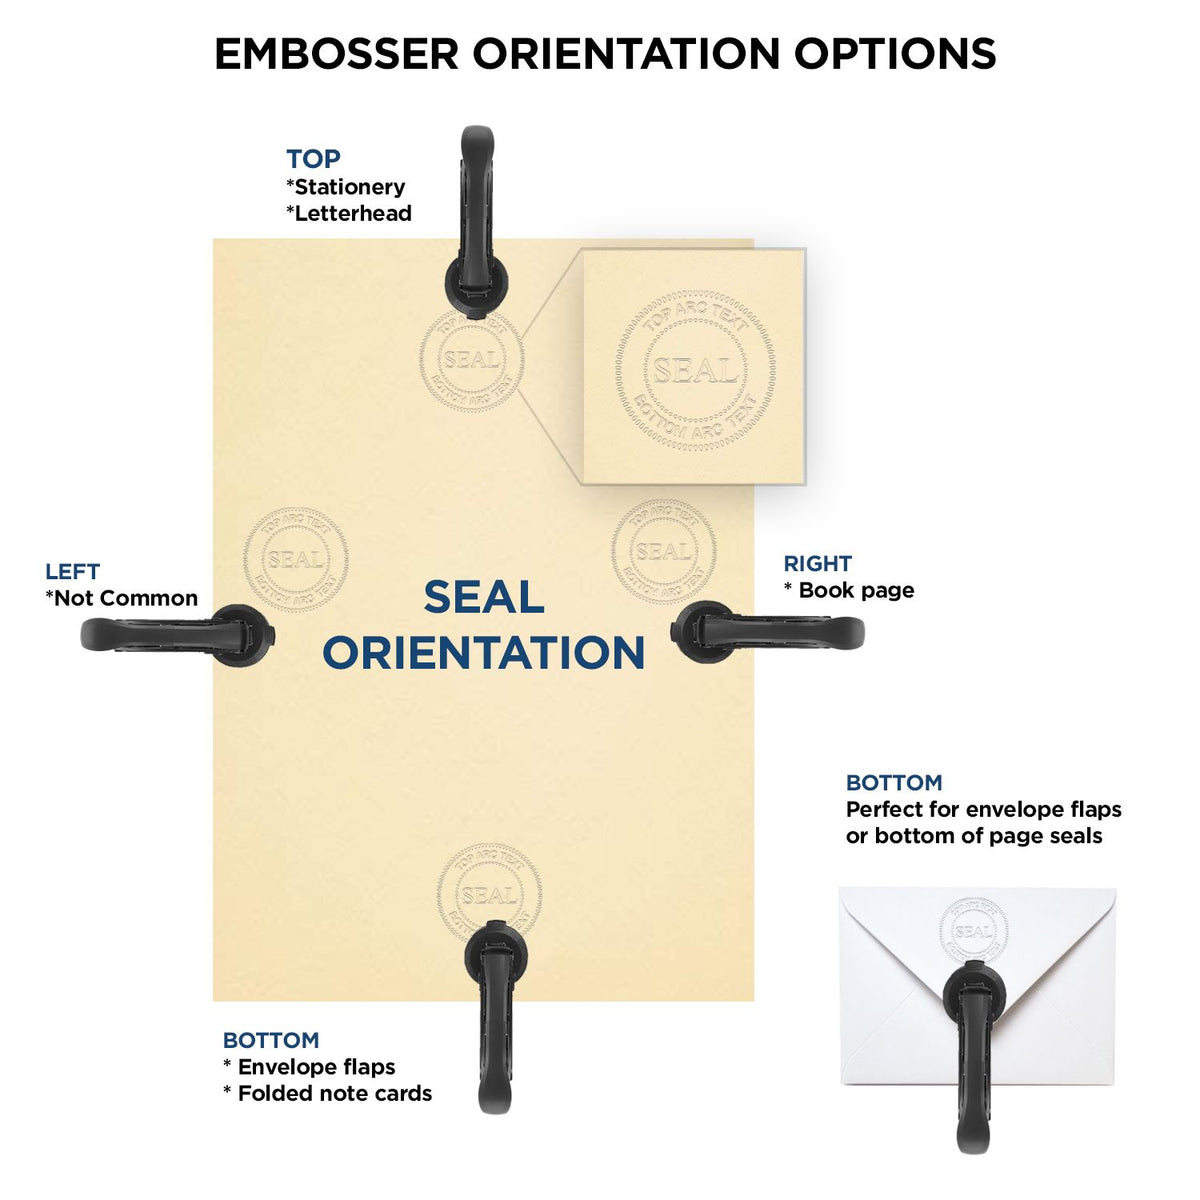 An infographic for the Heavy Duty Cast Iron Connecticut Engineer Seal Embosser showing embosser orientation, this is showing examples of a top, bottom, right and left insert.